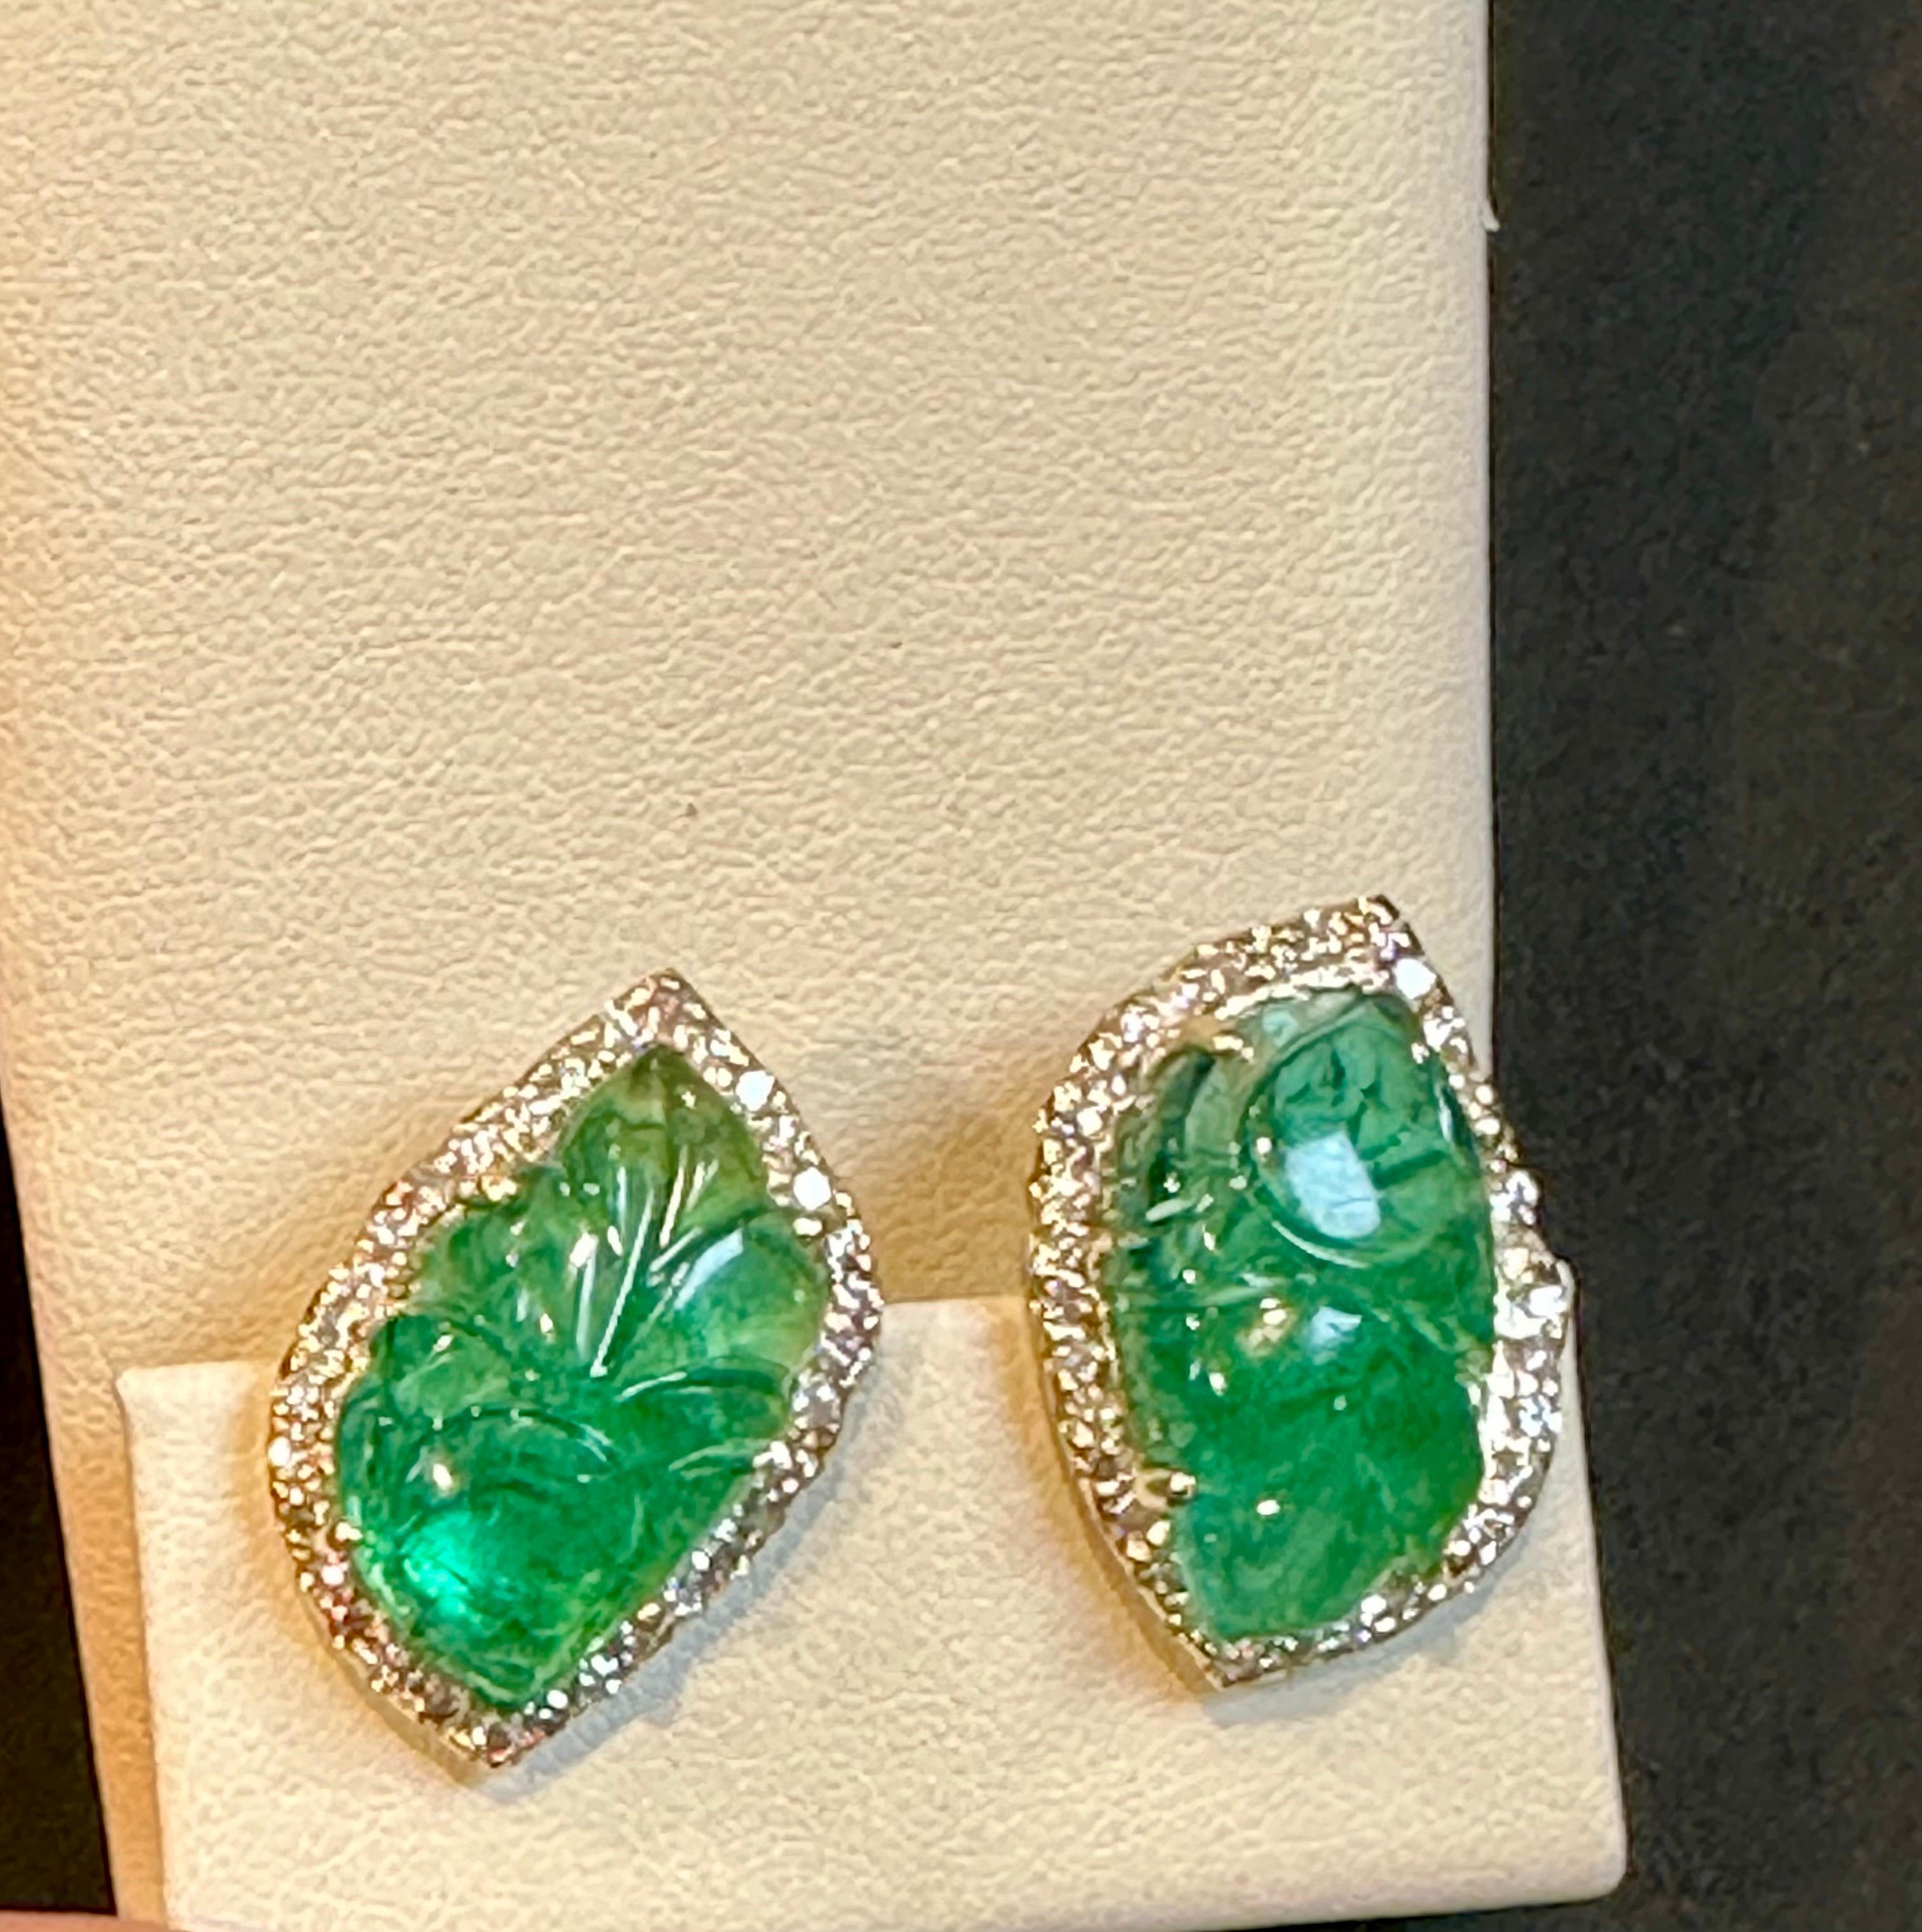 22 Ct Carved Emerald & 2 Ct Diamond Earrings 14 Karat Yellow Gold Post Earrings For Sale 3